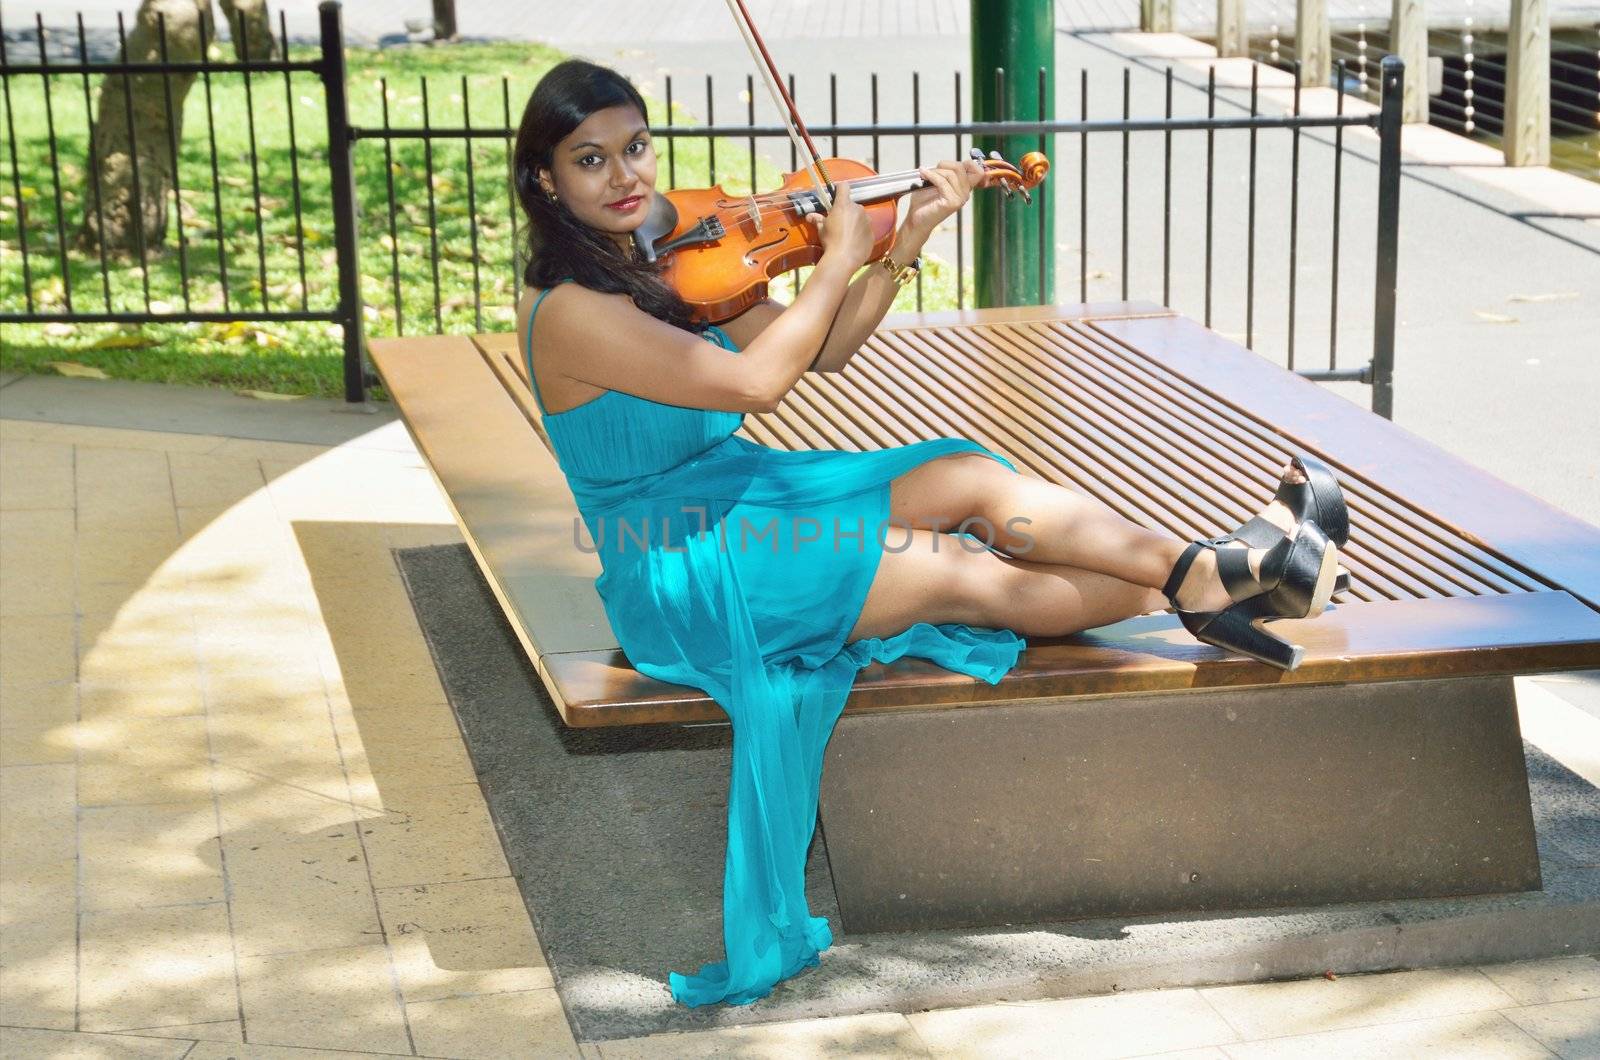 Attractive brunette musician providing live music in the park on her violin